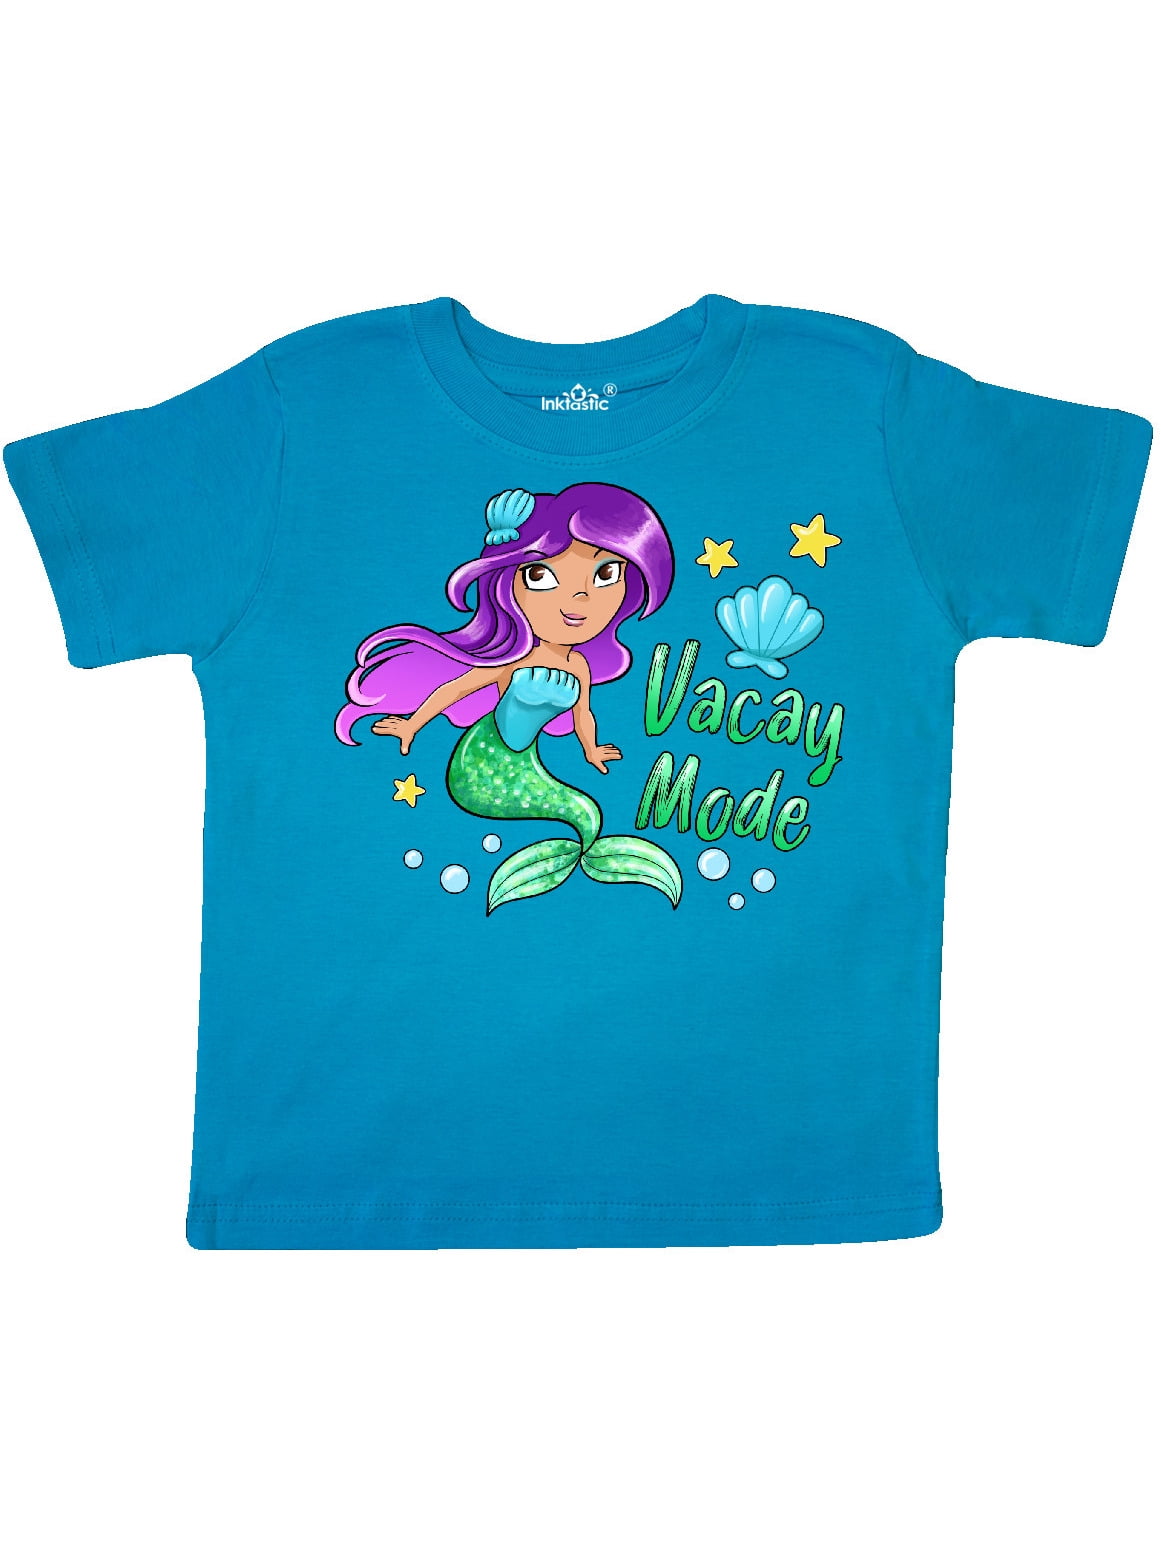 Mermaid with Purple Tail Toddler Long Sleeve T-Shirt inktastic Vacay Mode